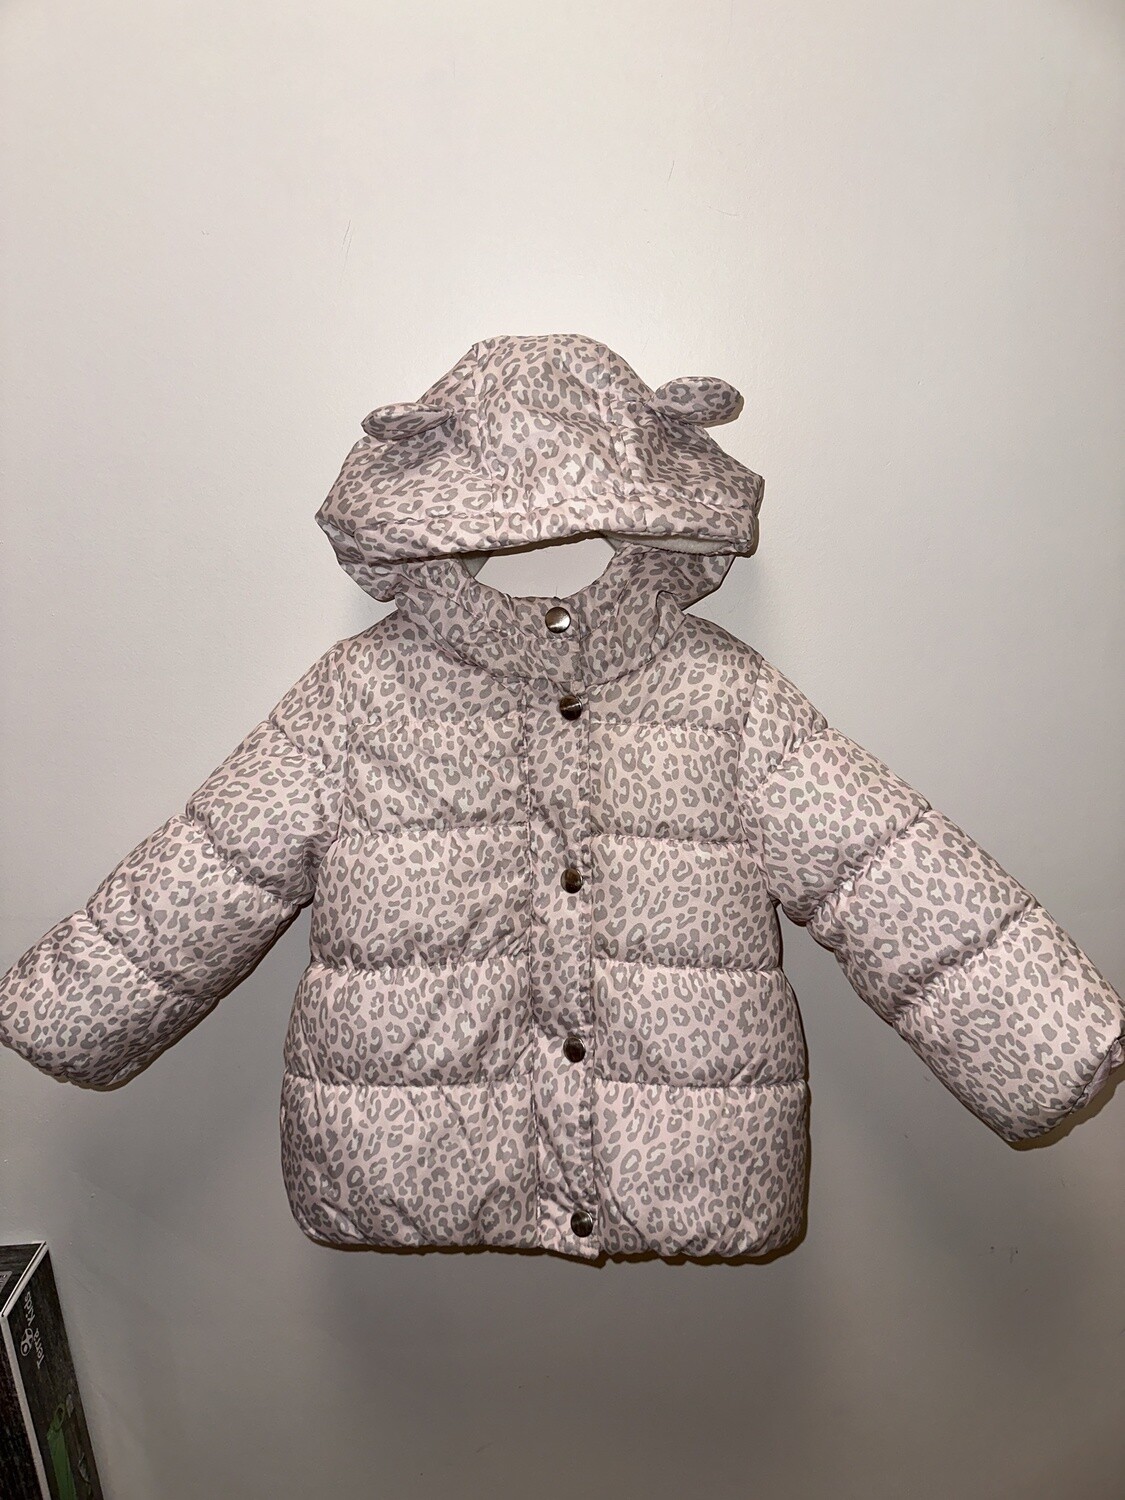 Used - Carters - Winter Jackets - 18 months - PWE550